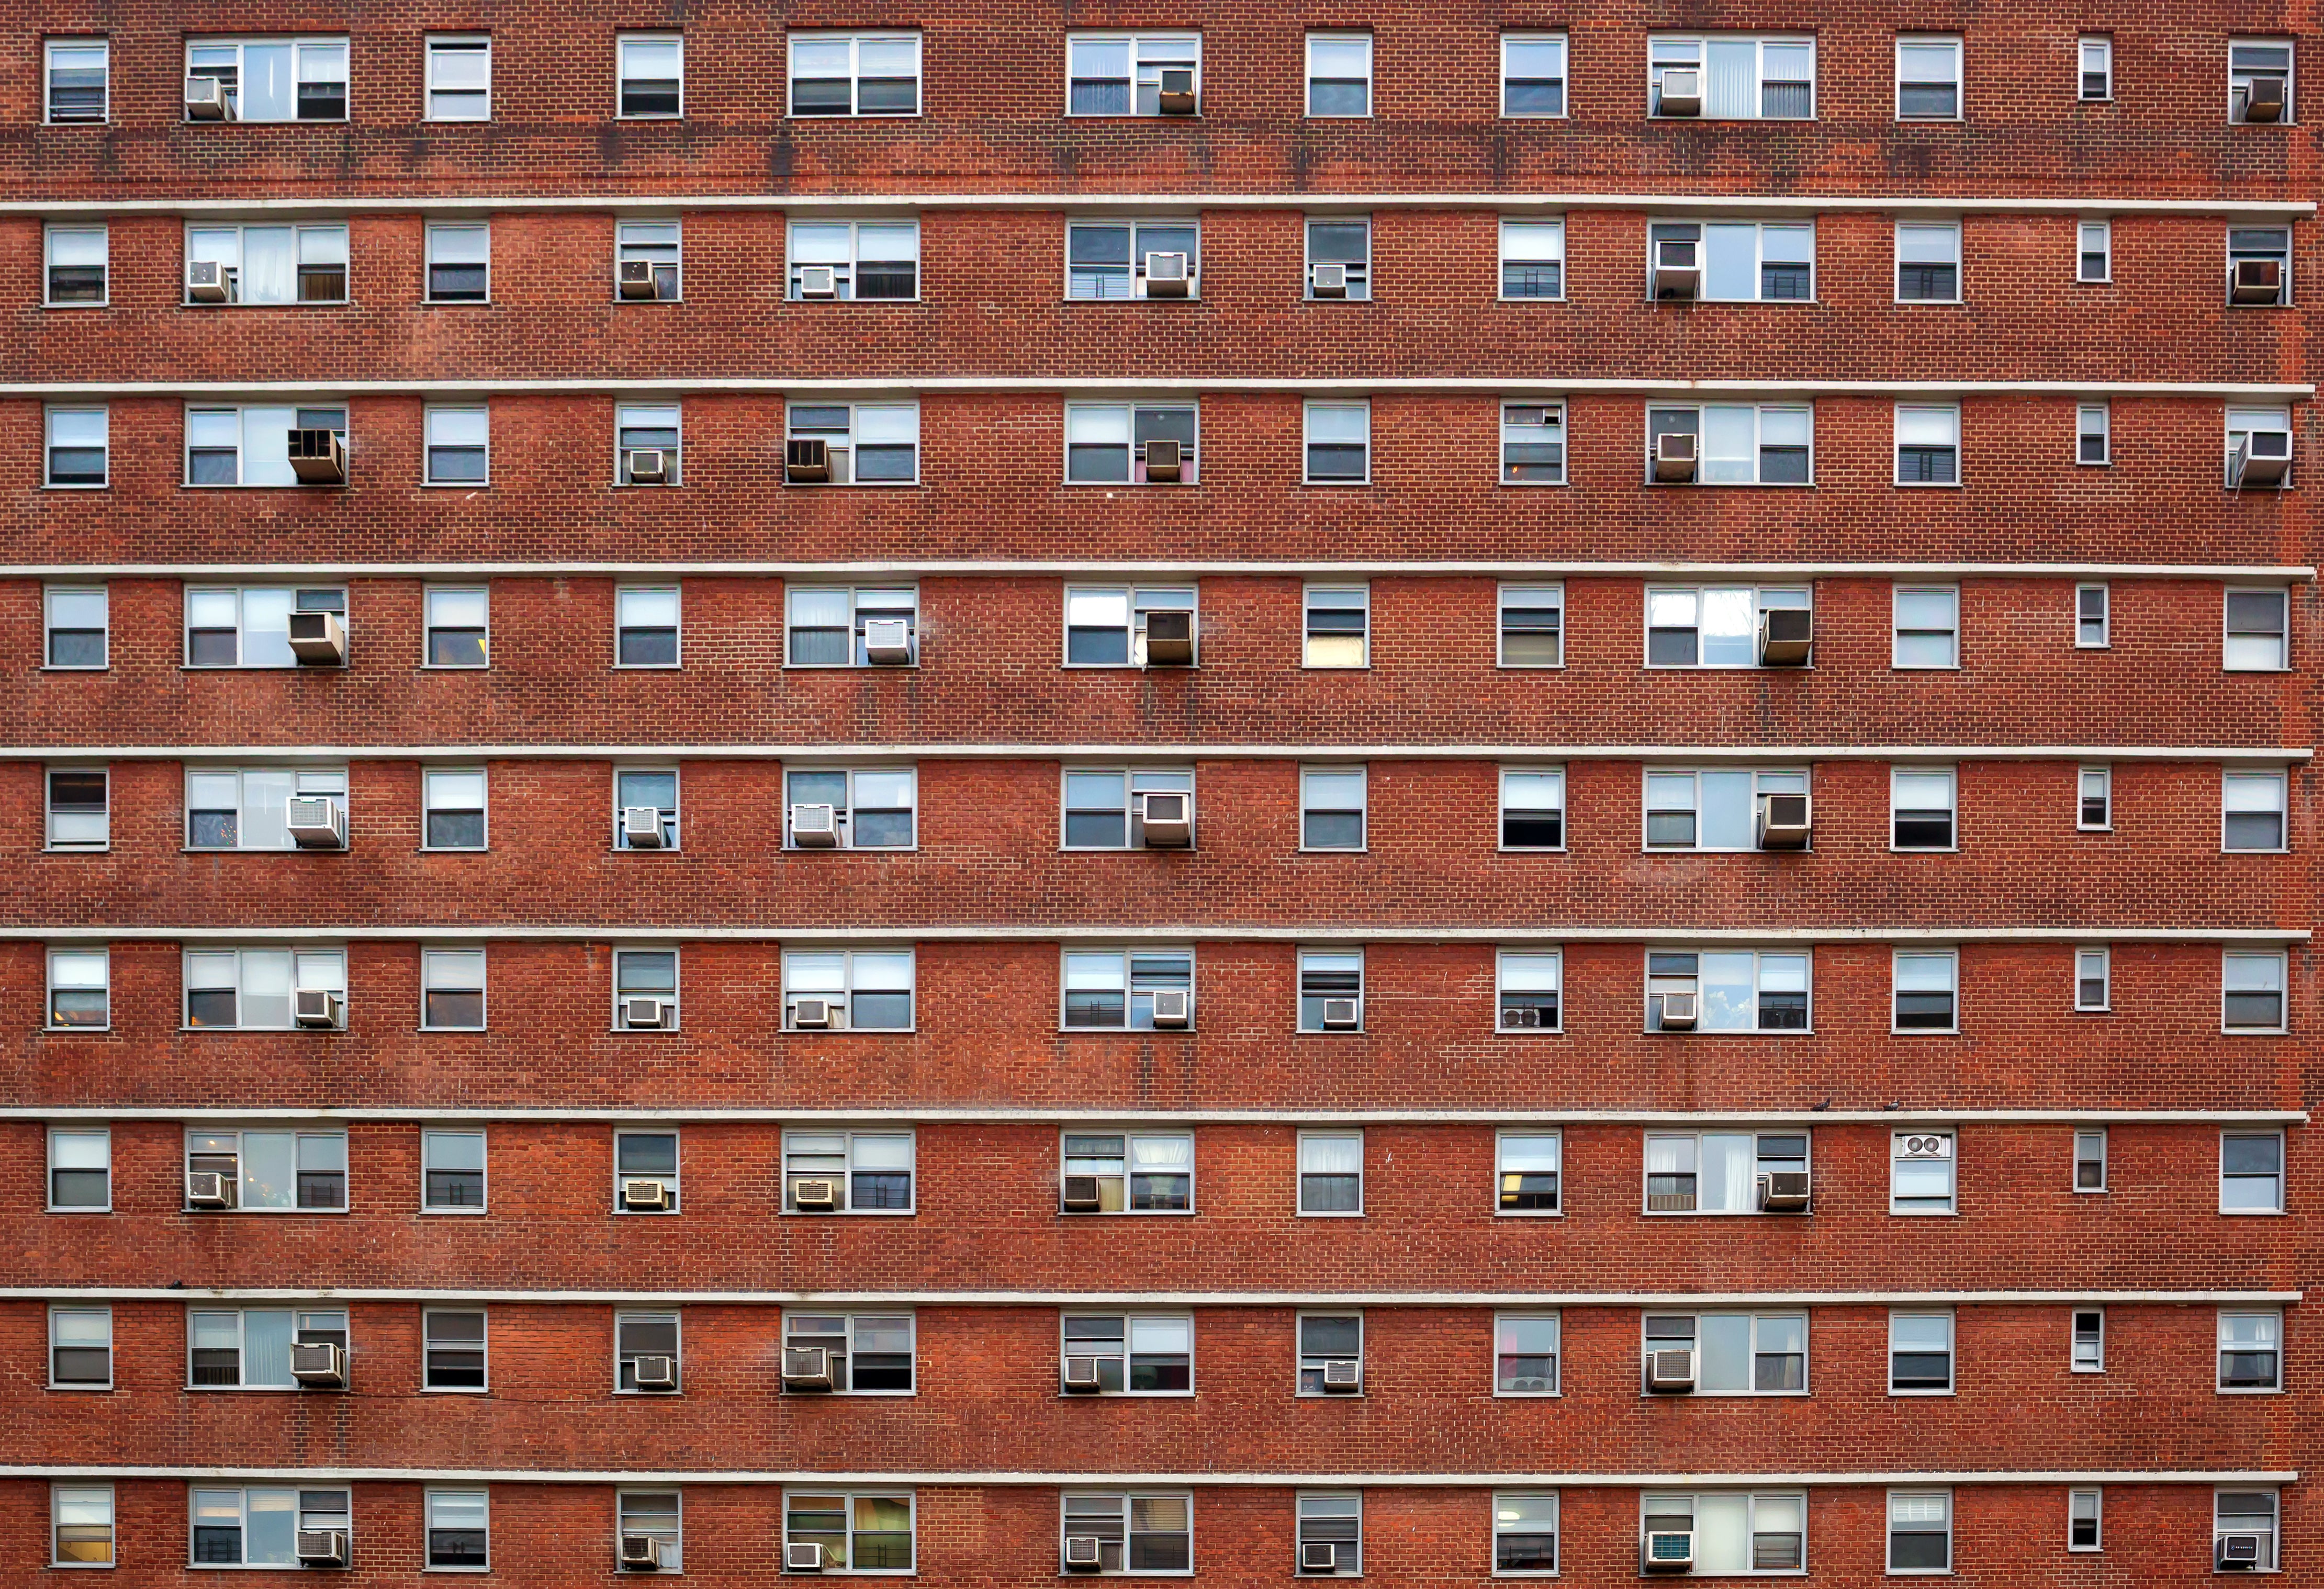 Brick guilding with identical small windows and Air conditioners.